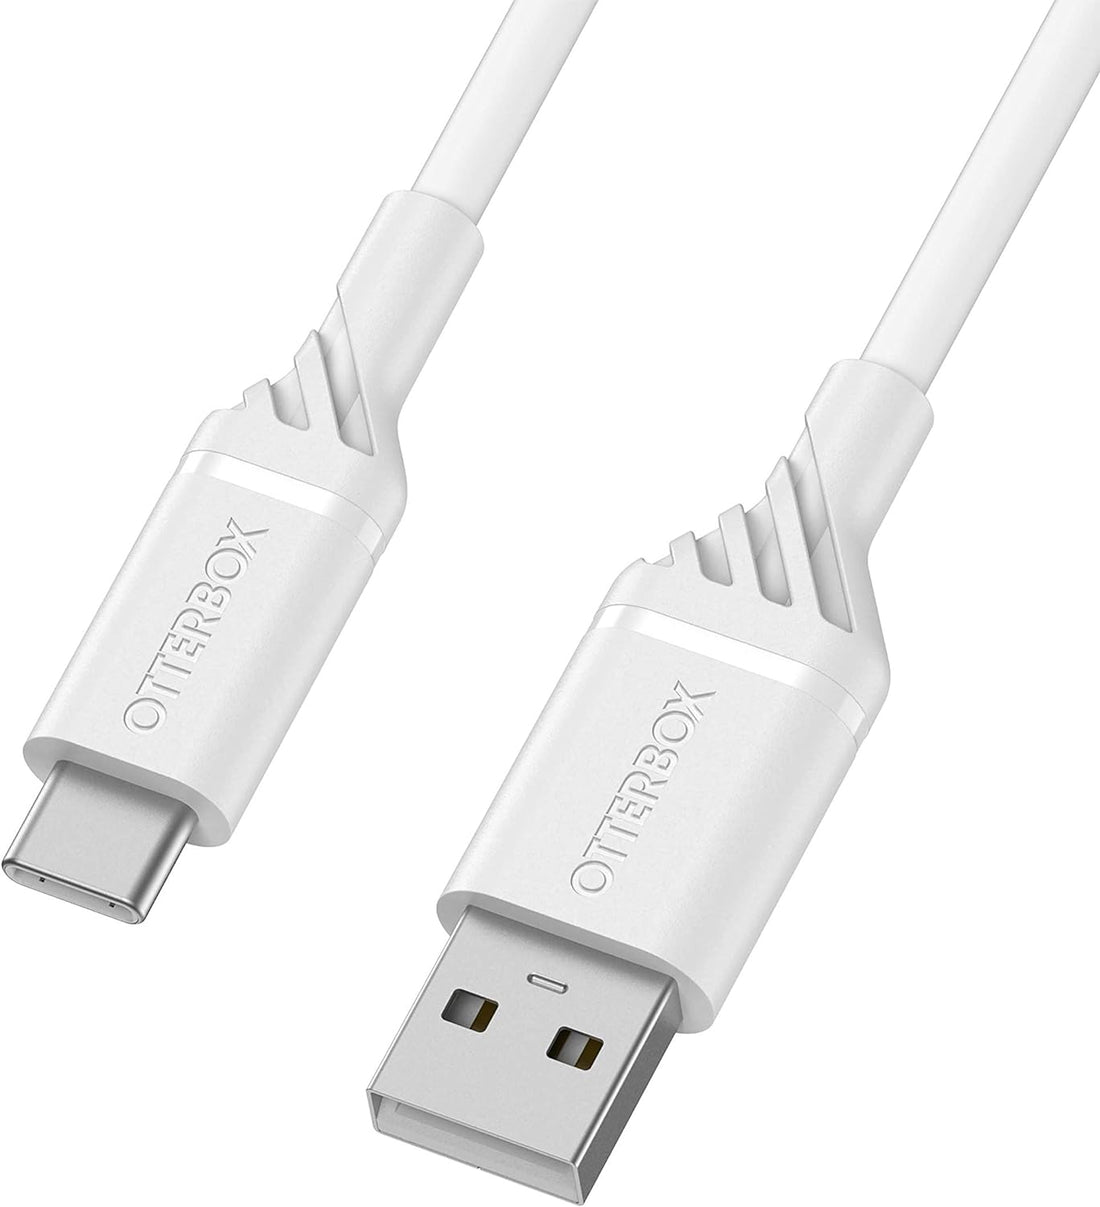 OtterBox USB-A to USB-C Cable - 2M/6.6FT - Cloud Dream White (New)